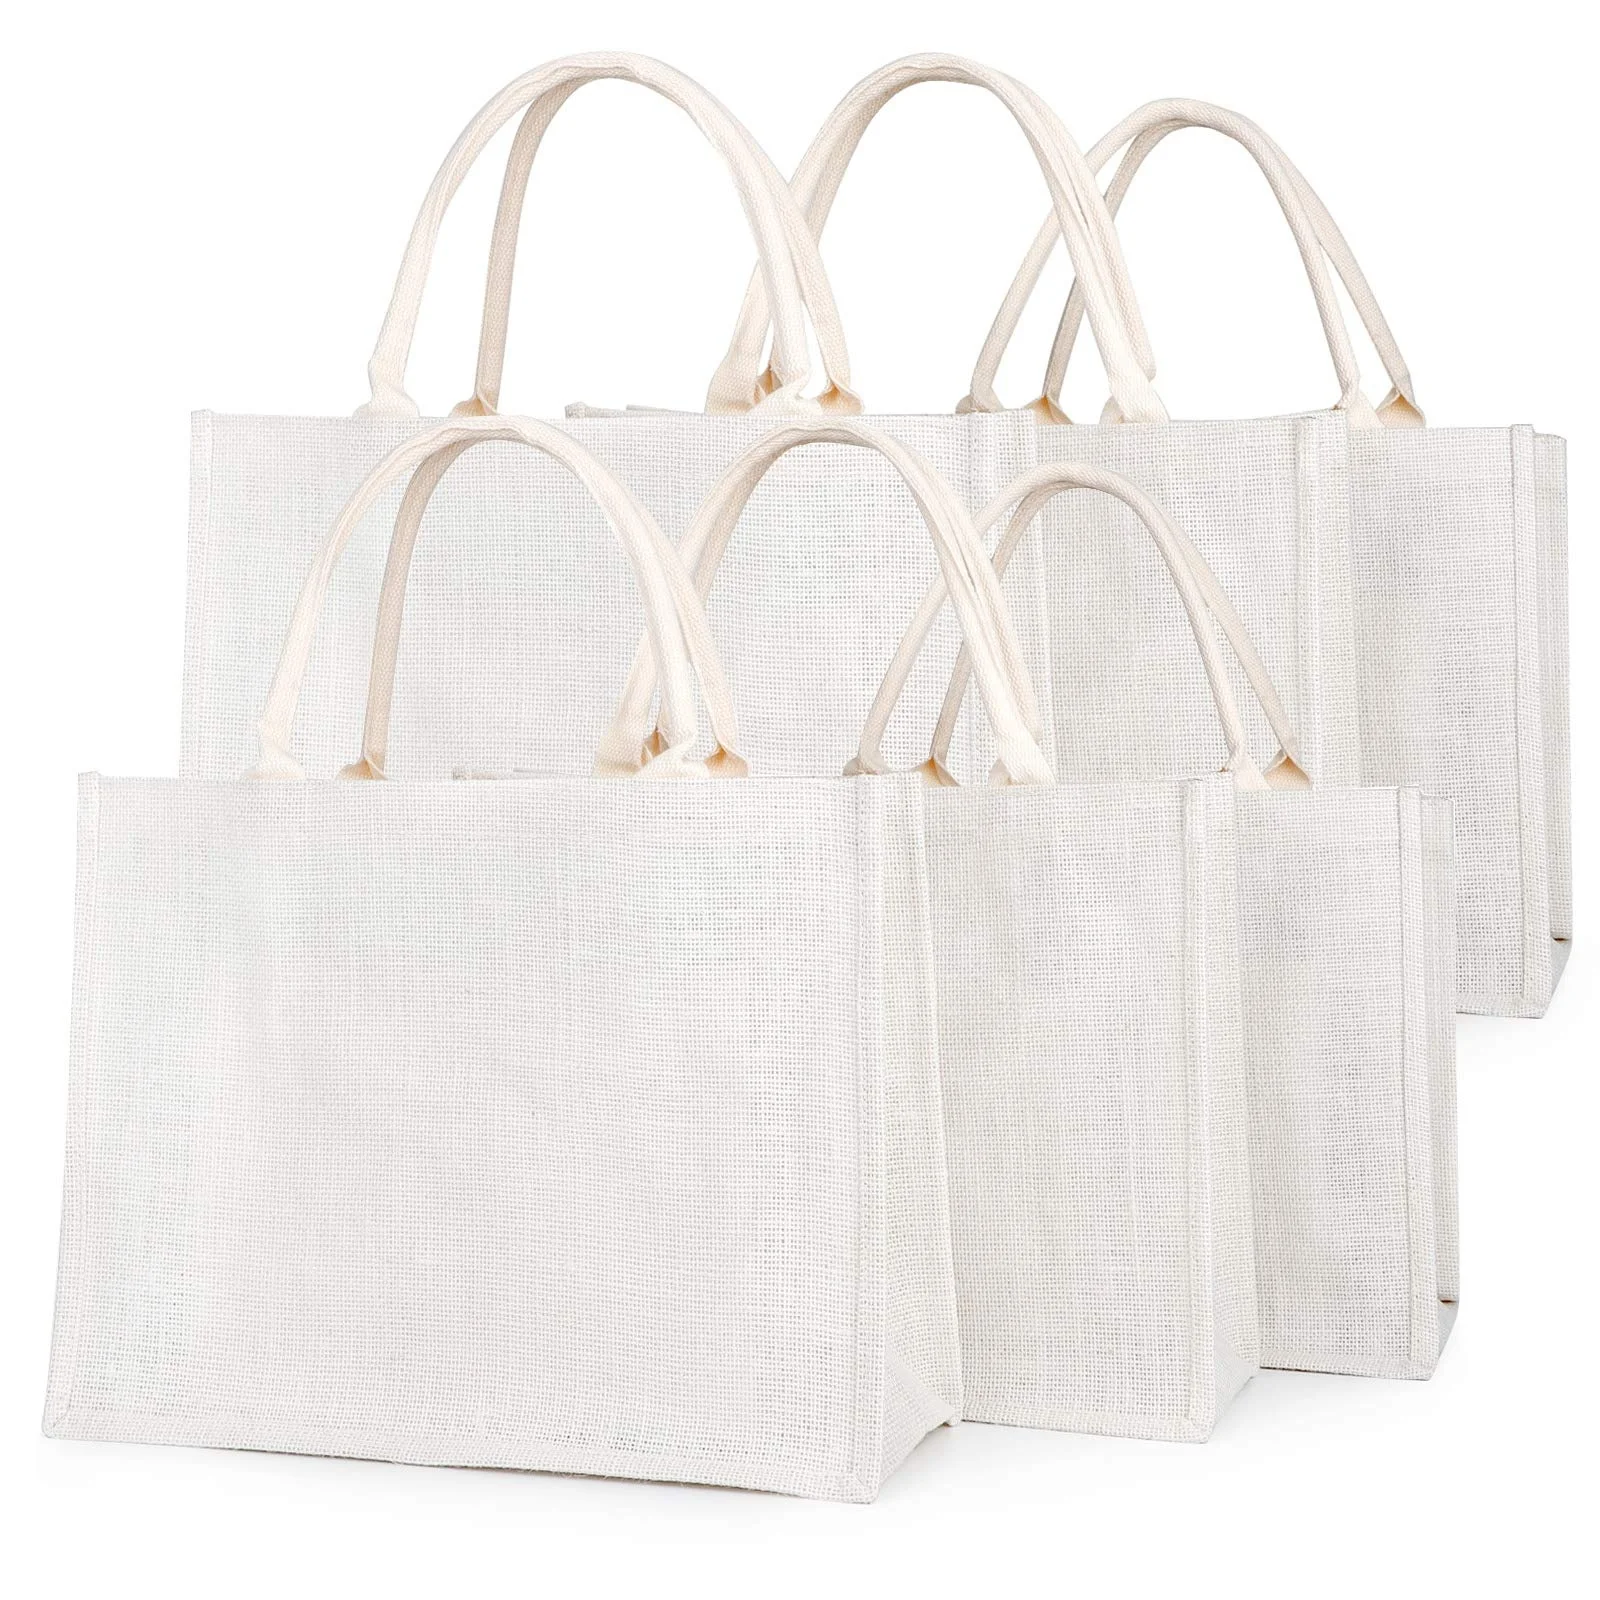 

Natural jute bag eco friendly color tote bags reusable jute shopping bag with sizes choose, Colorful